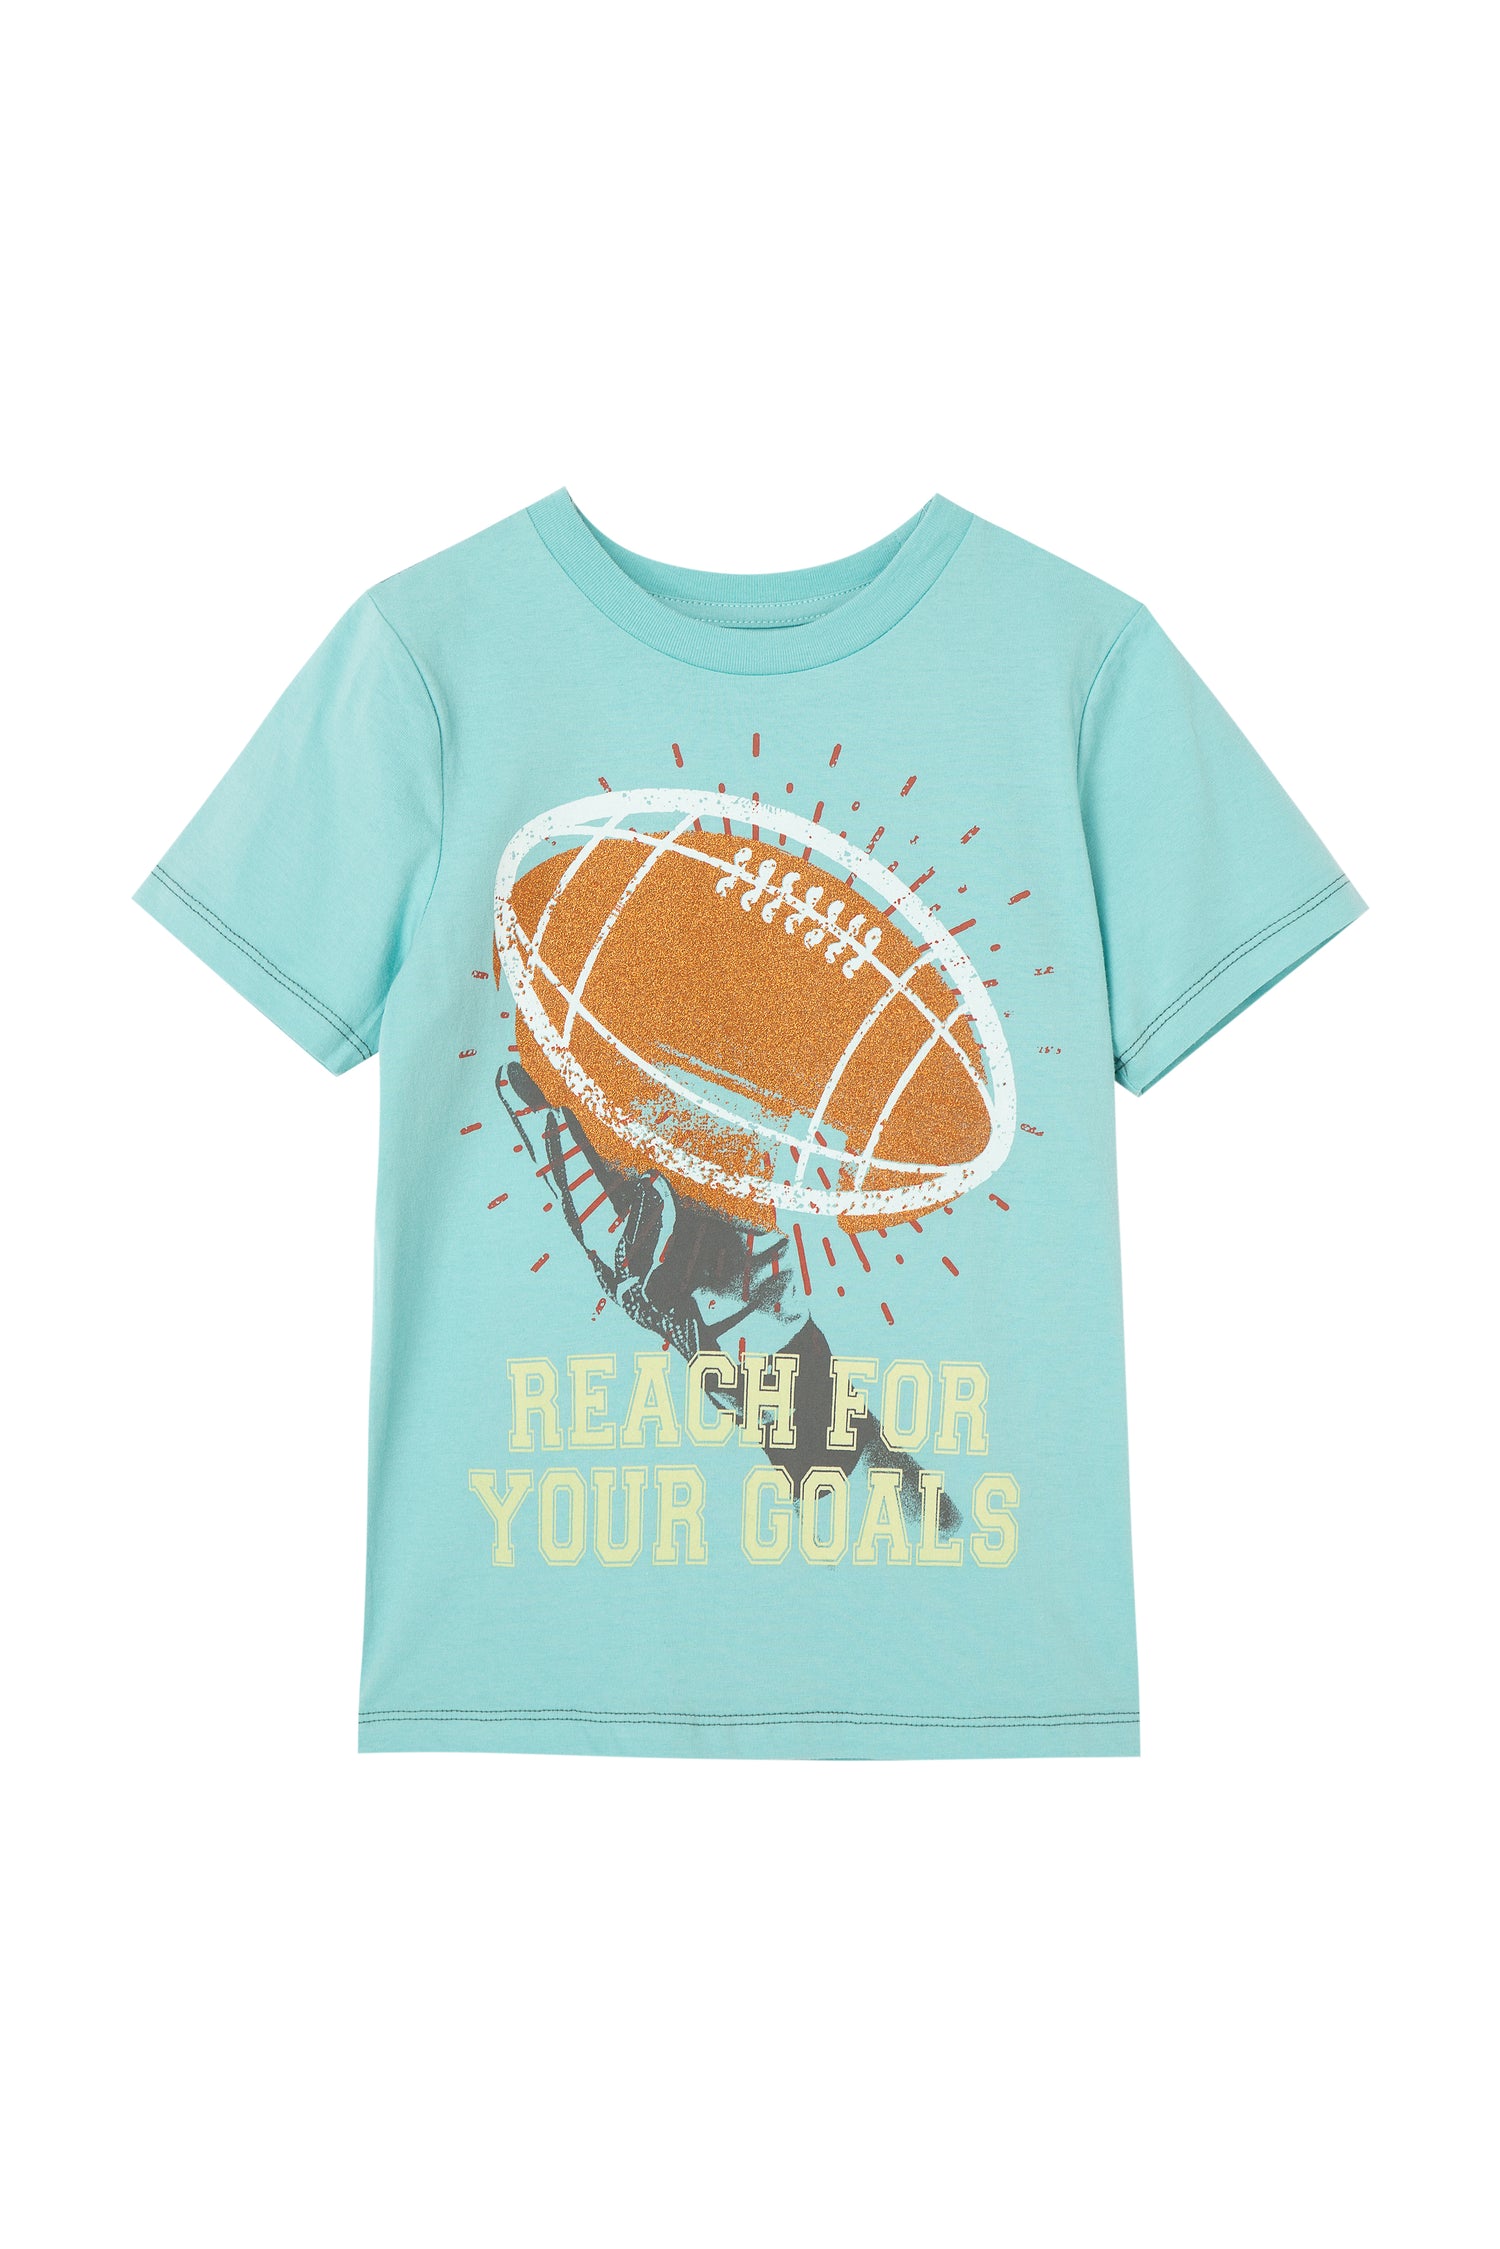 Front view of blue tee with a football and "reach for your goals" written